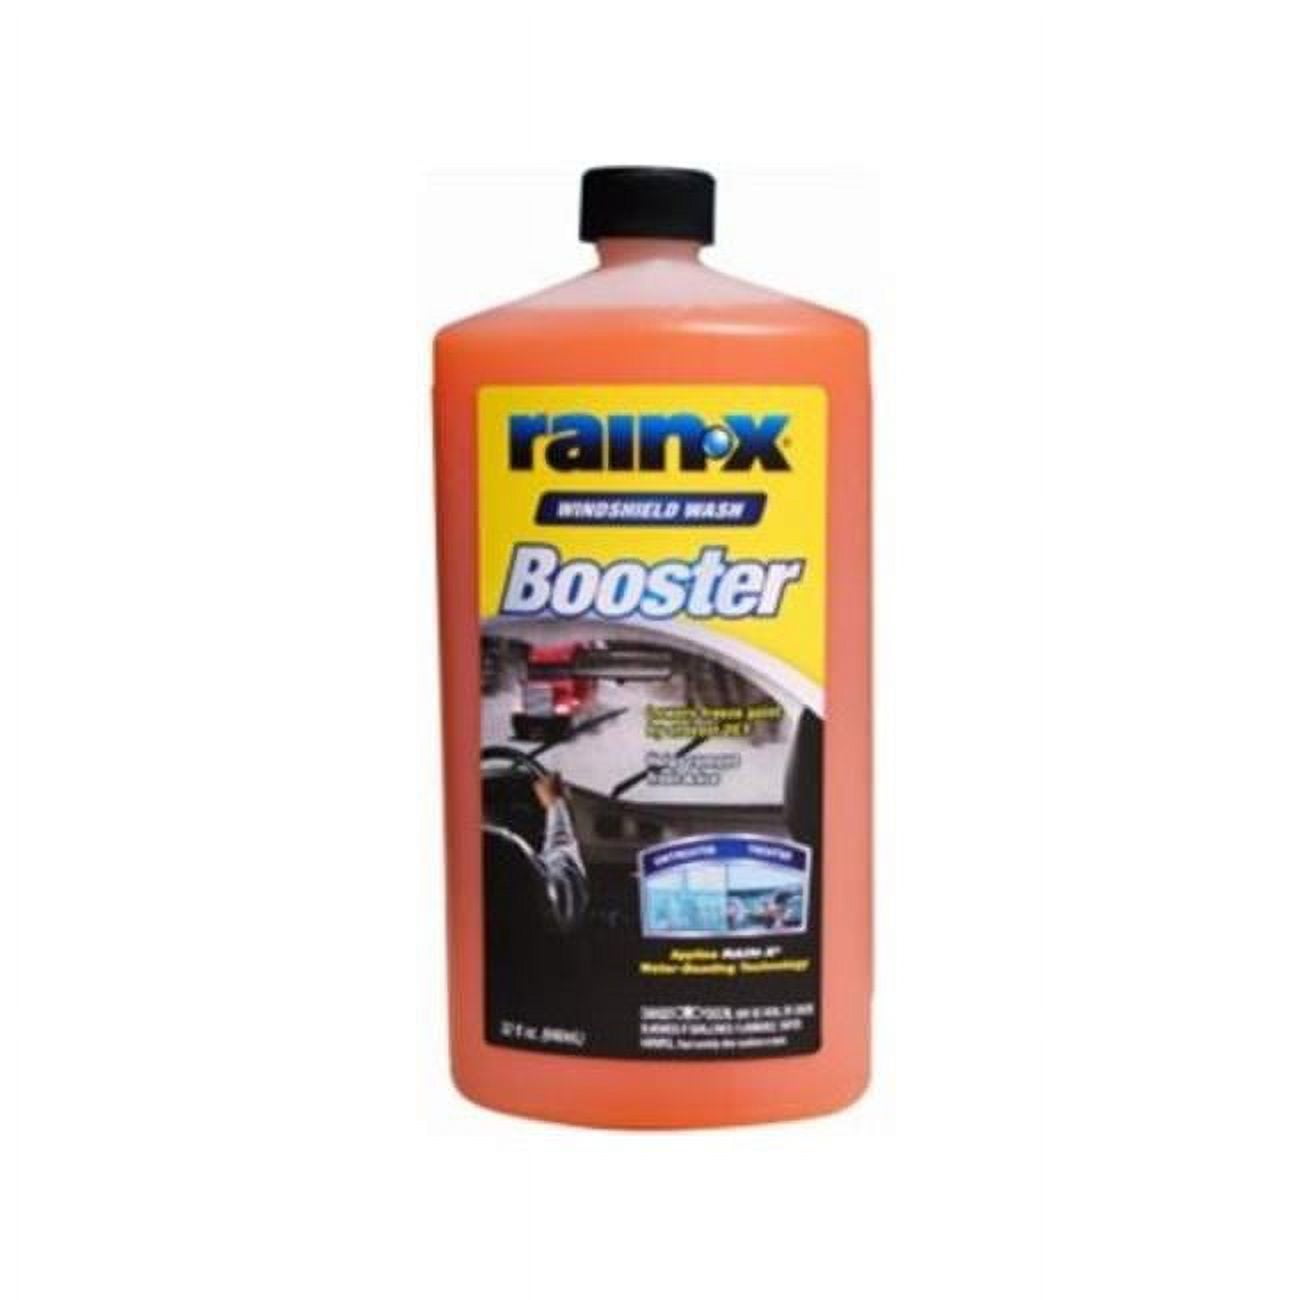 Antifreeze / Coolant & Windshield Washer Fluid. 3E - Lil Dusty Online  Auctions - All Estate Services, LLC